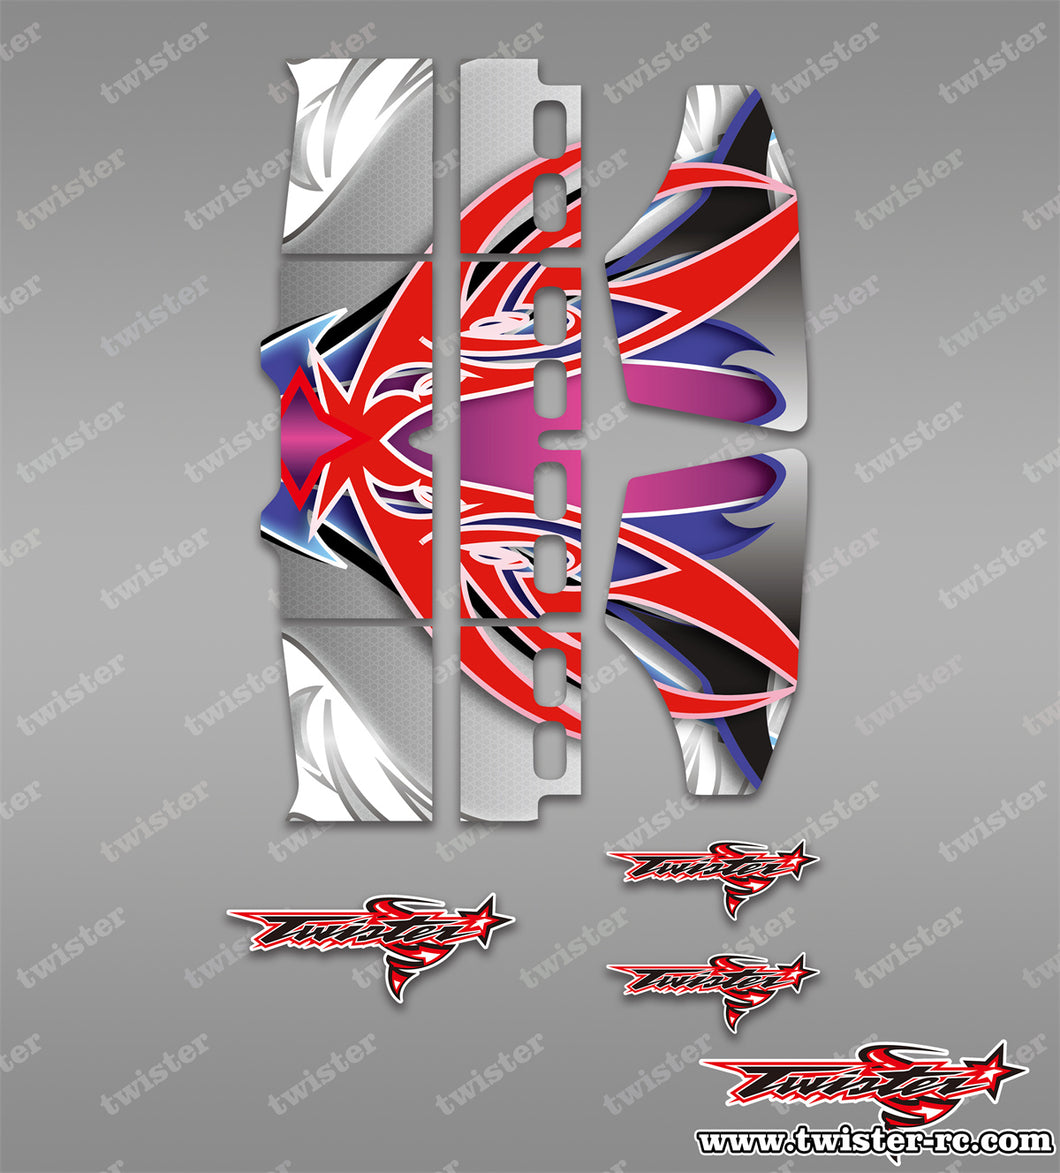 TR-TW-MA12 T-WORK'S Airflow Buggy Wing Metallic/Optical White Pattern Wrap ( Type A12 ) 4 colors